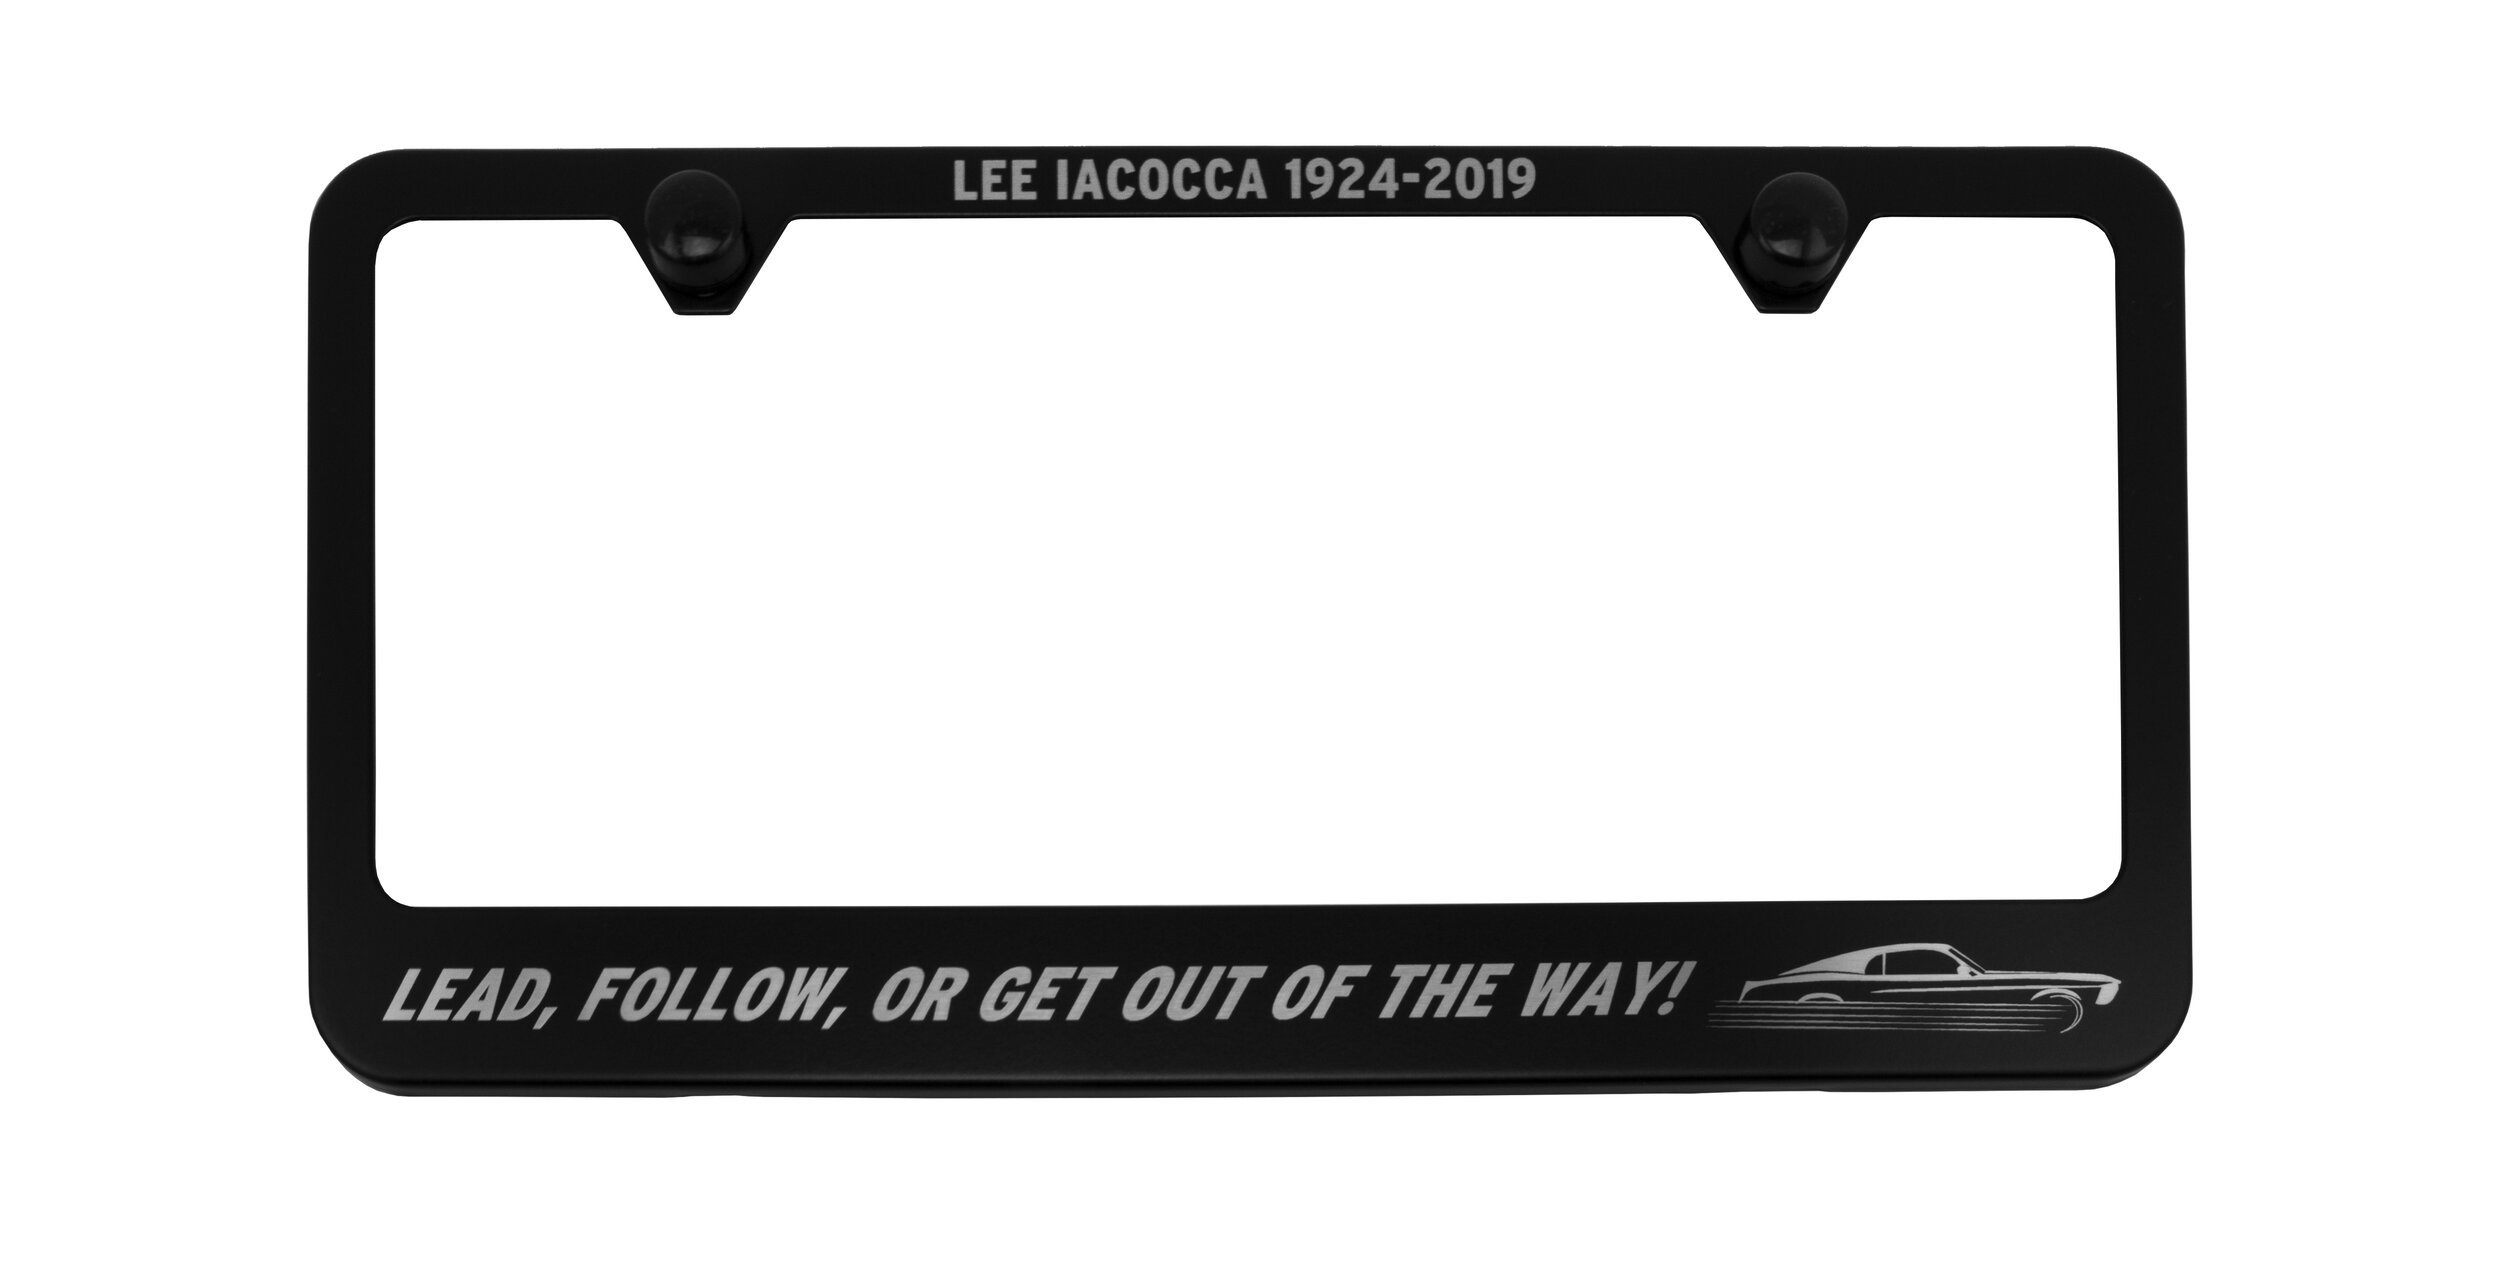 Camisasca Lee Iacocca Stainless Steel License Plate Frame (Copy)